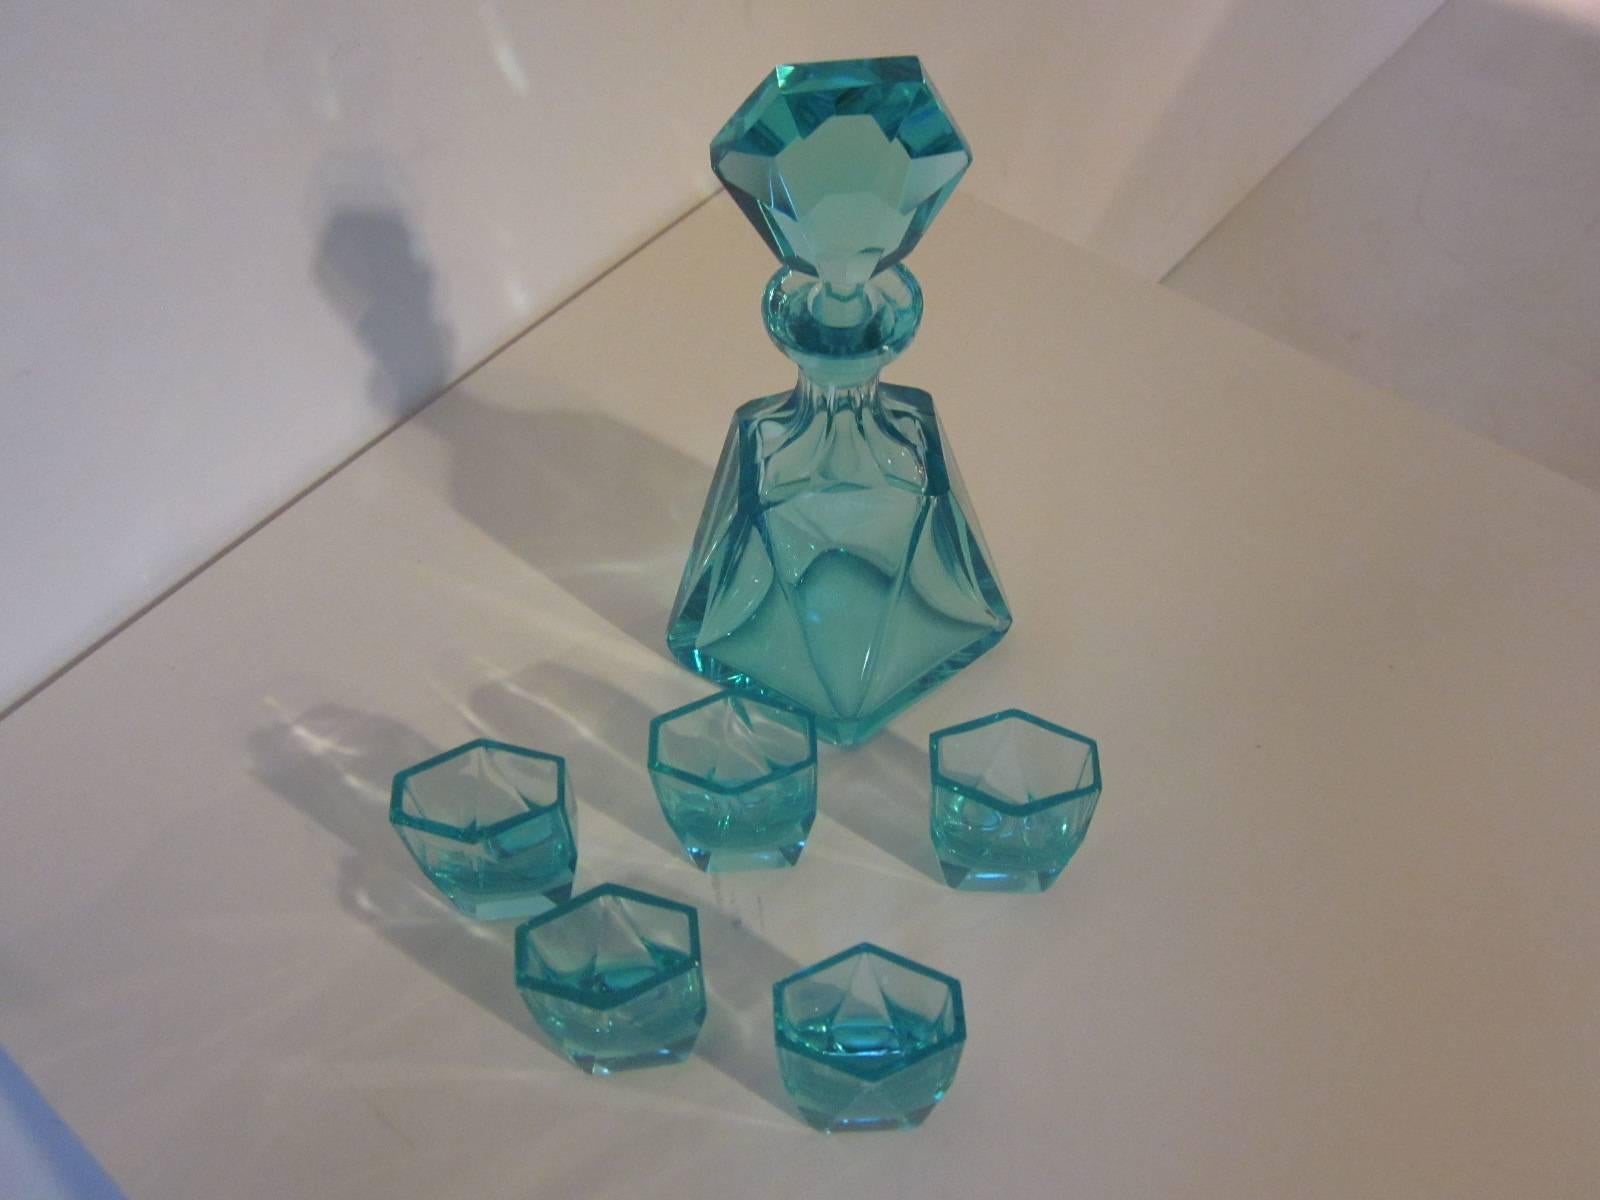 A aqua marine colored crystal decanter set with five matching small glasses in the cubist style of Ruba Rombic, the stopper, body and glasses are all cut to a fine standard, heavy with a great feel. The glasses measure 2.25" H x @" L x